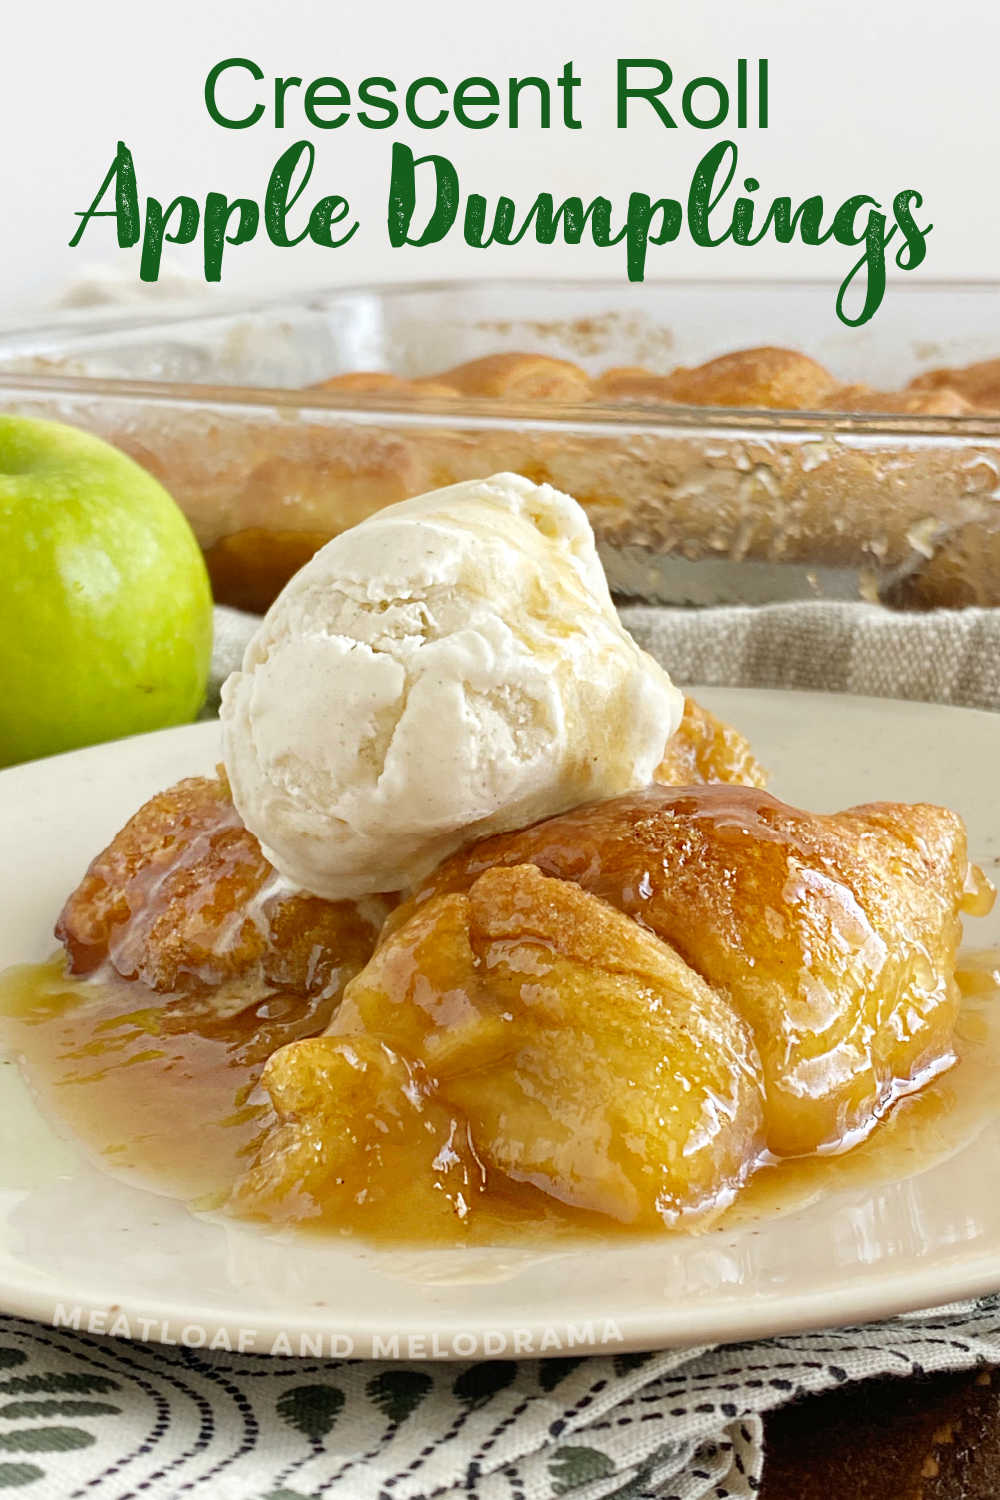 This Crescent Roll Apple Dumplings Recipe is a super easy fall dessert made with crescent roll dough and apple slices in a delicious caramel sauce. The secret ingredient in these easy apple dumplings is lemon lime soda (sprite or mountain dew). via @meamel